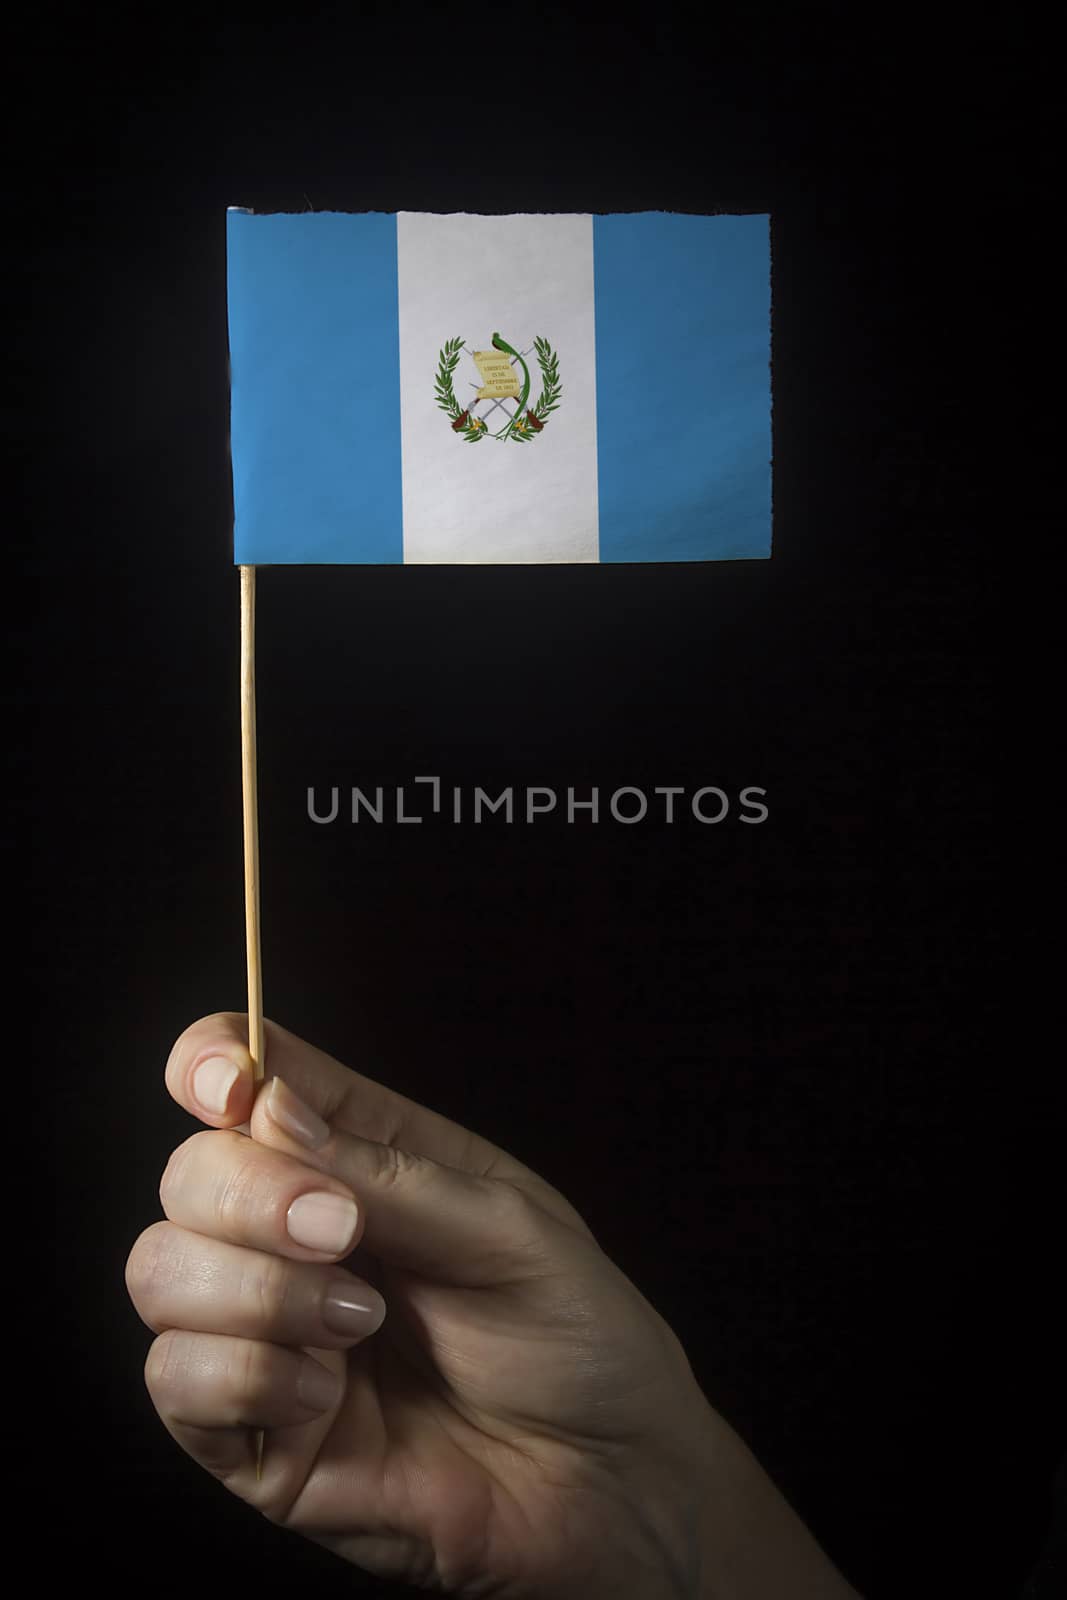 Hand with small flag of state of Guatemala